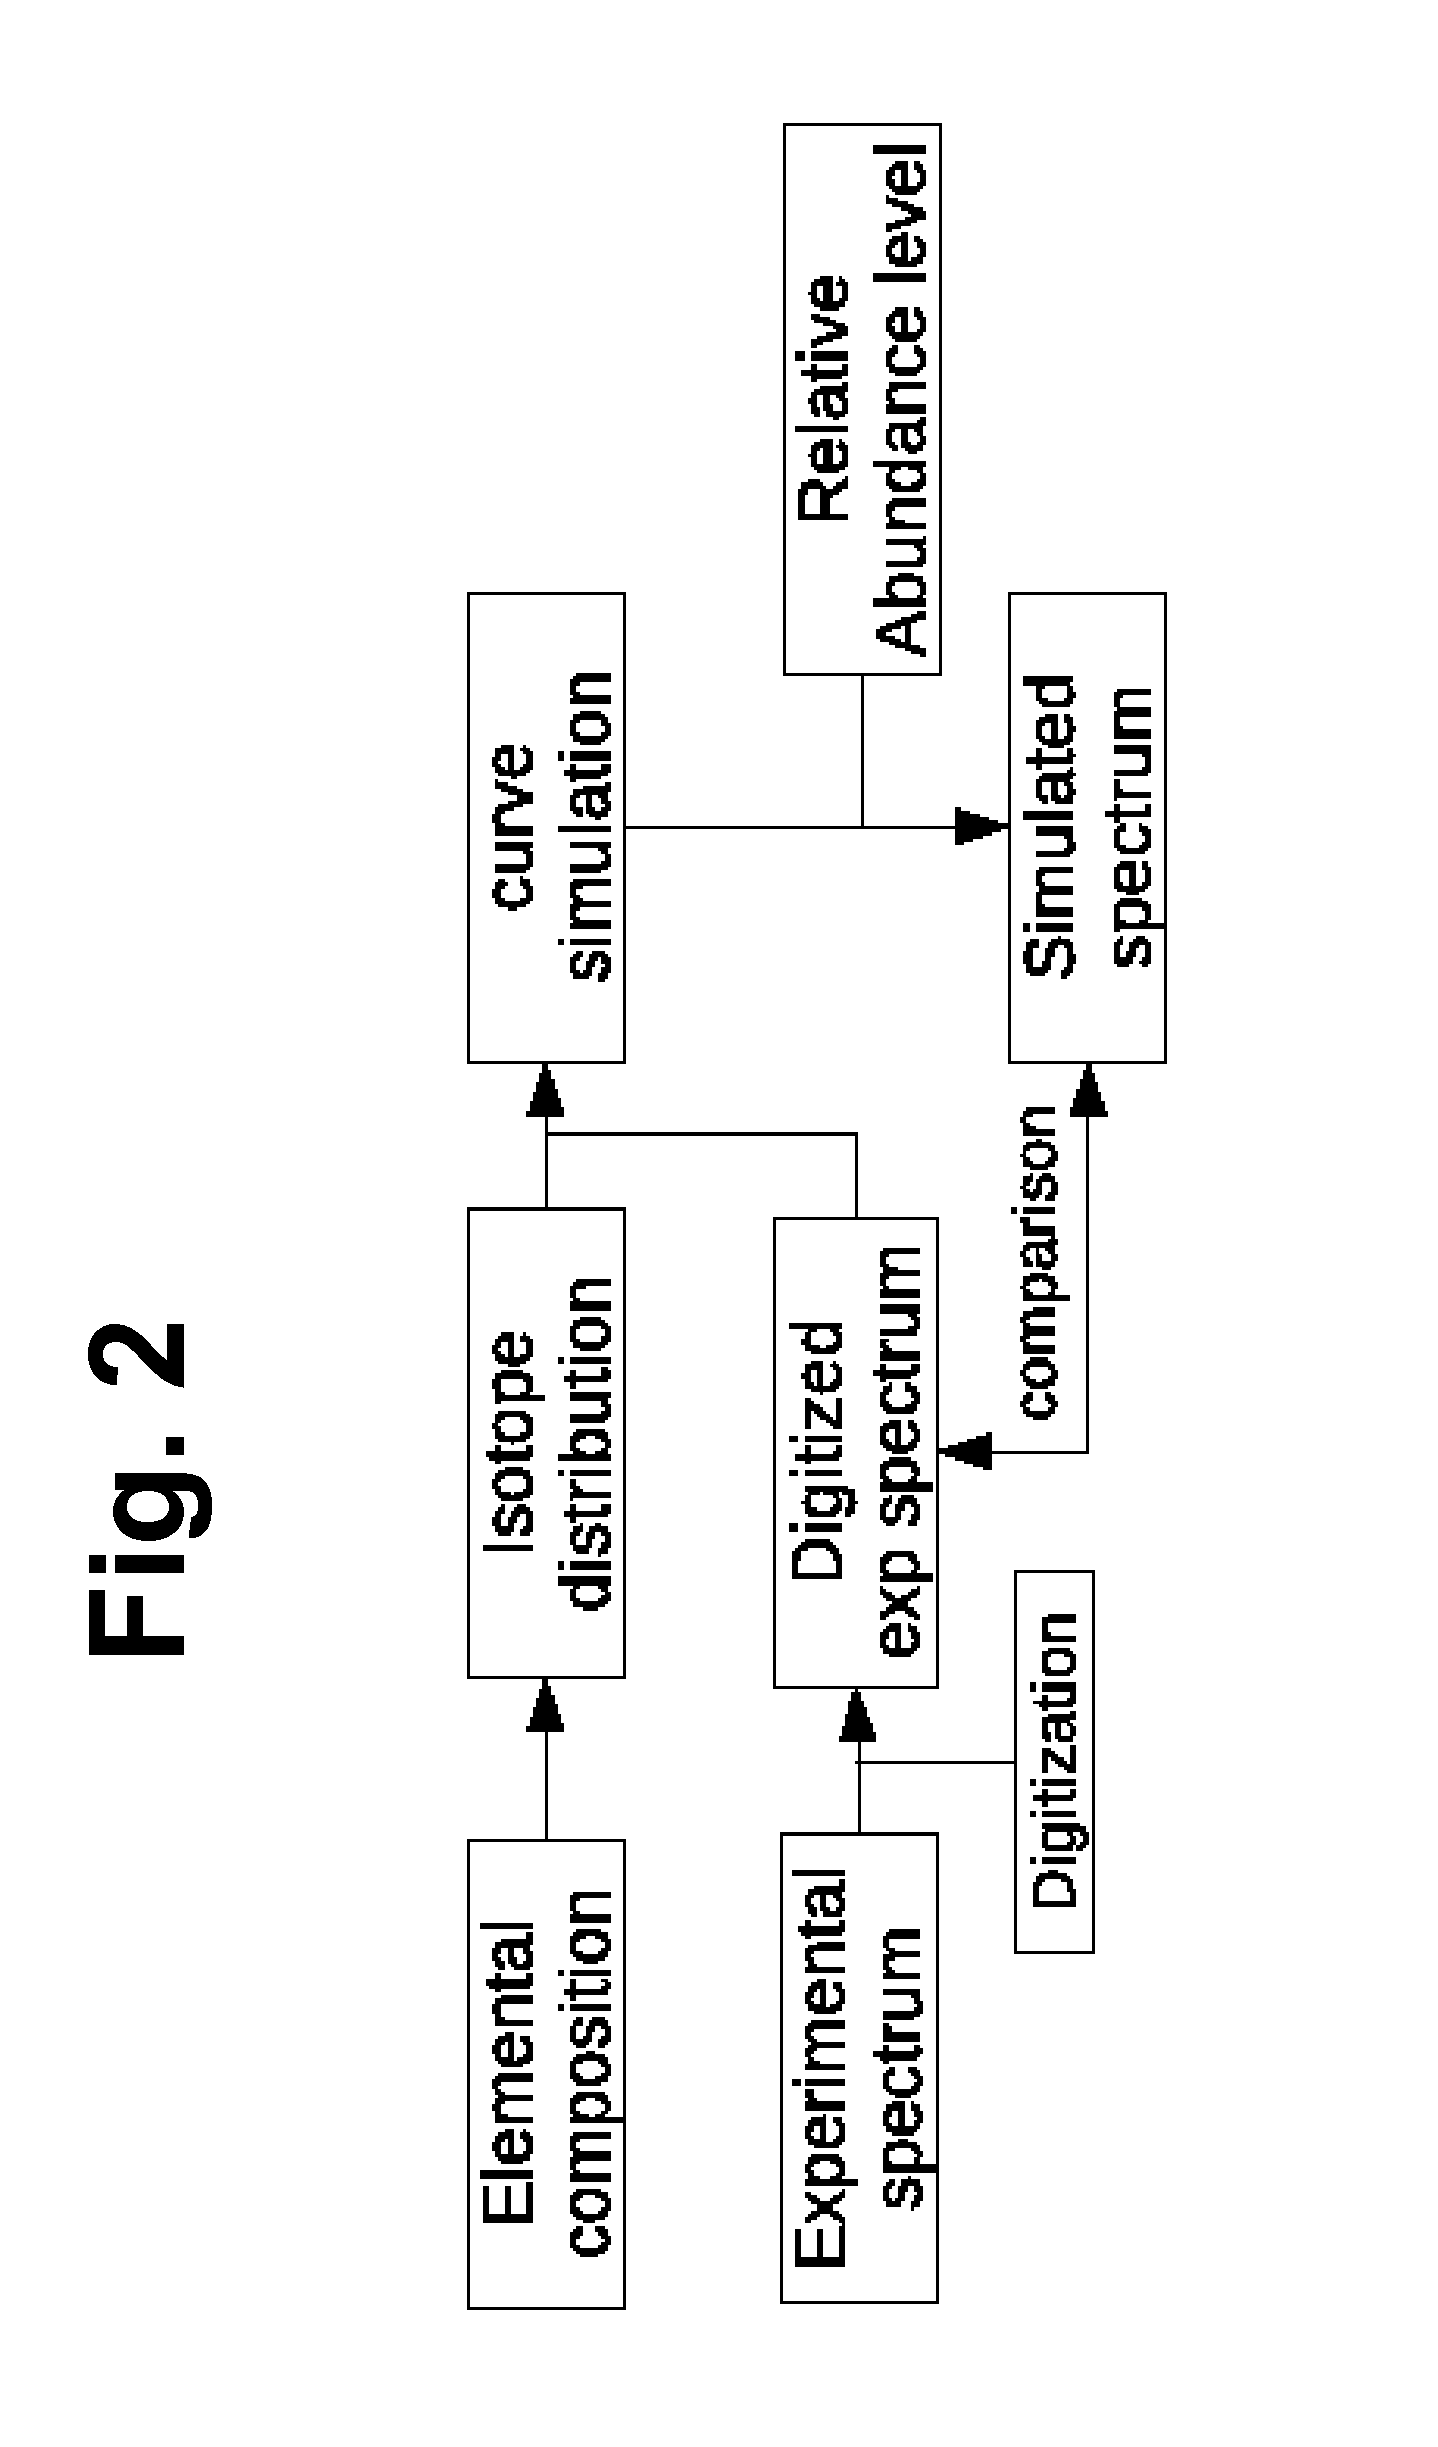 Method And System Using Computer Simulation For The Quantitative Analysis Of Glycan Biosynthesis